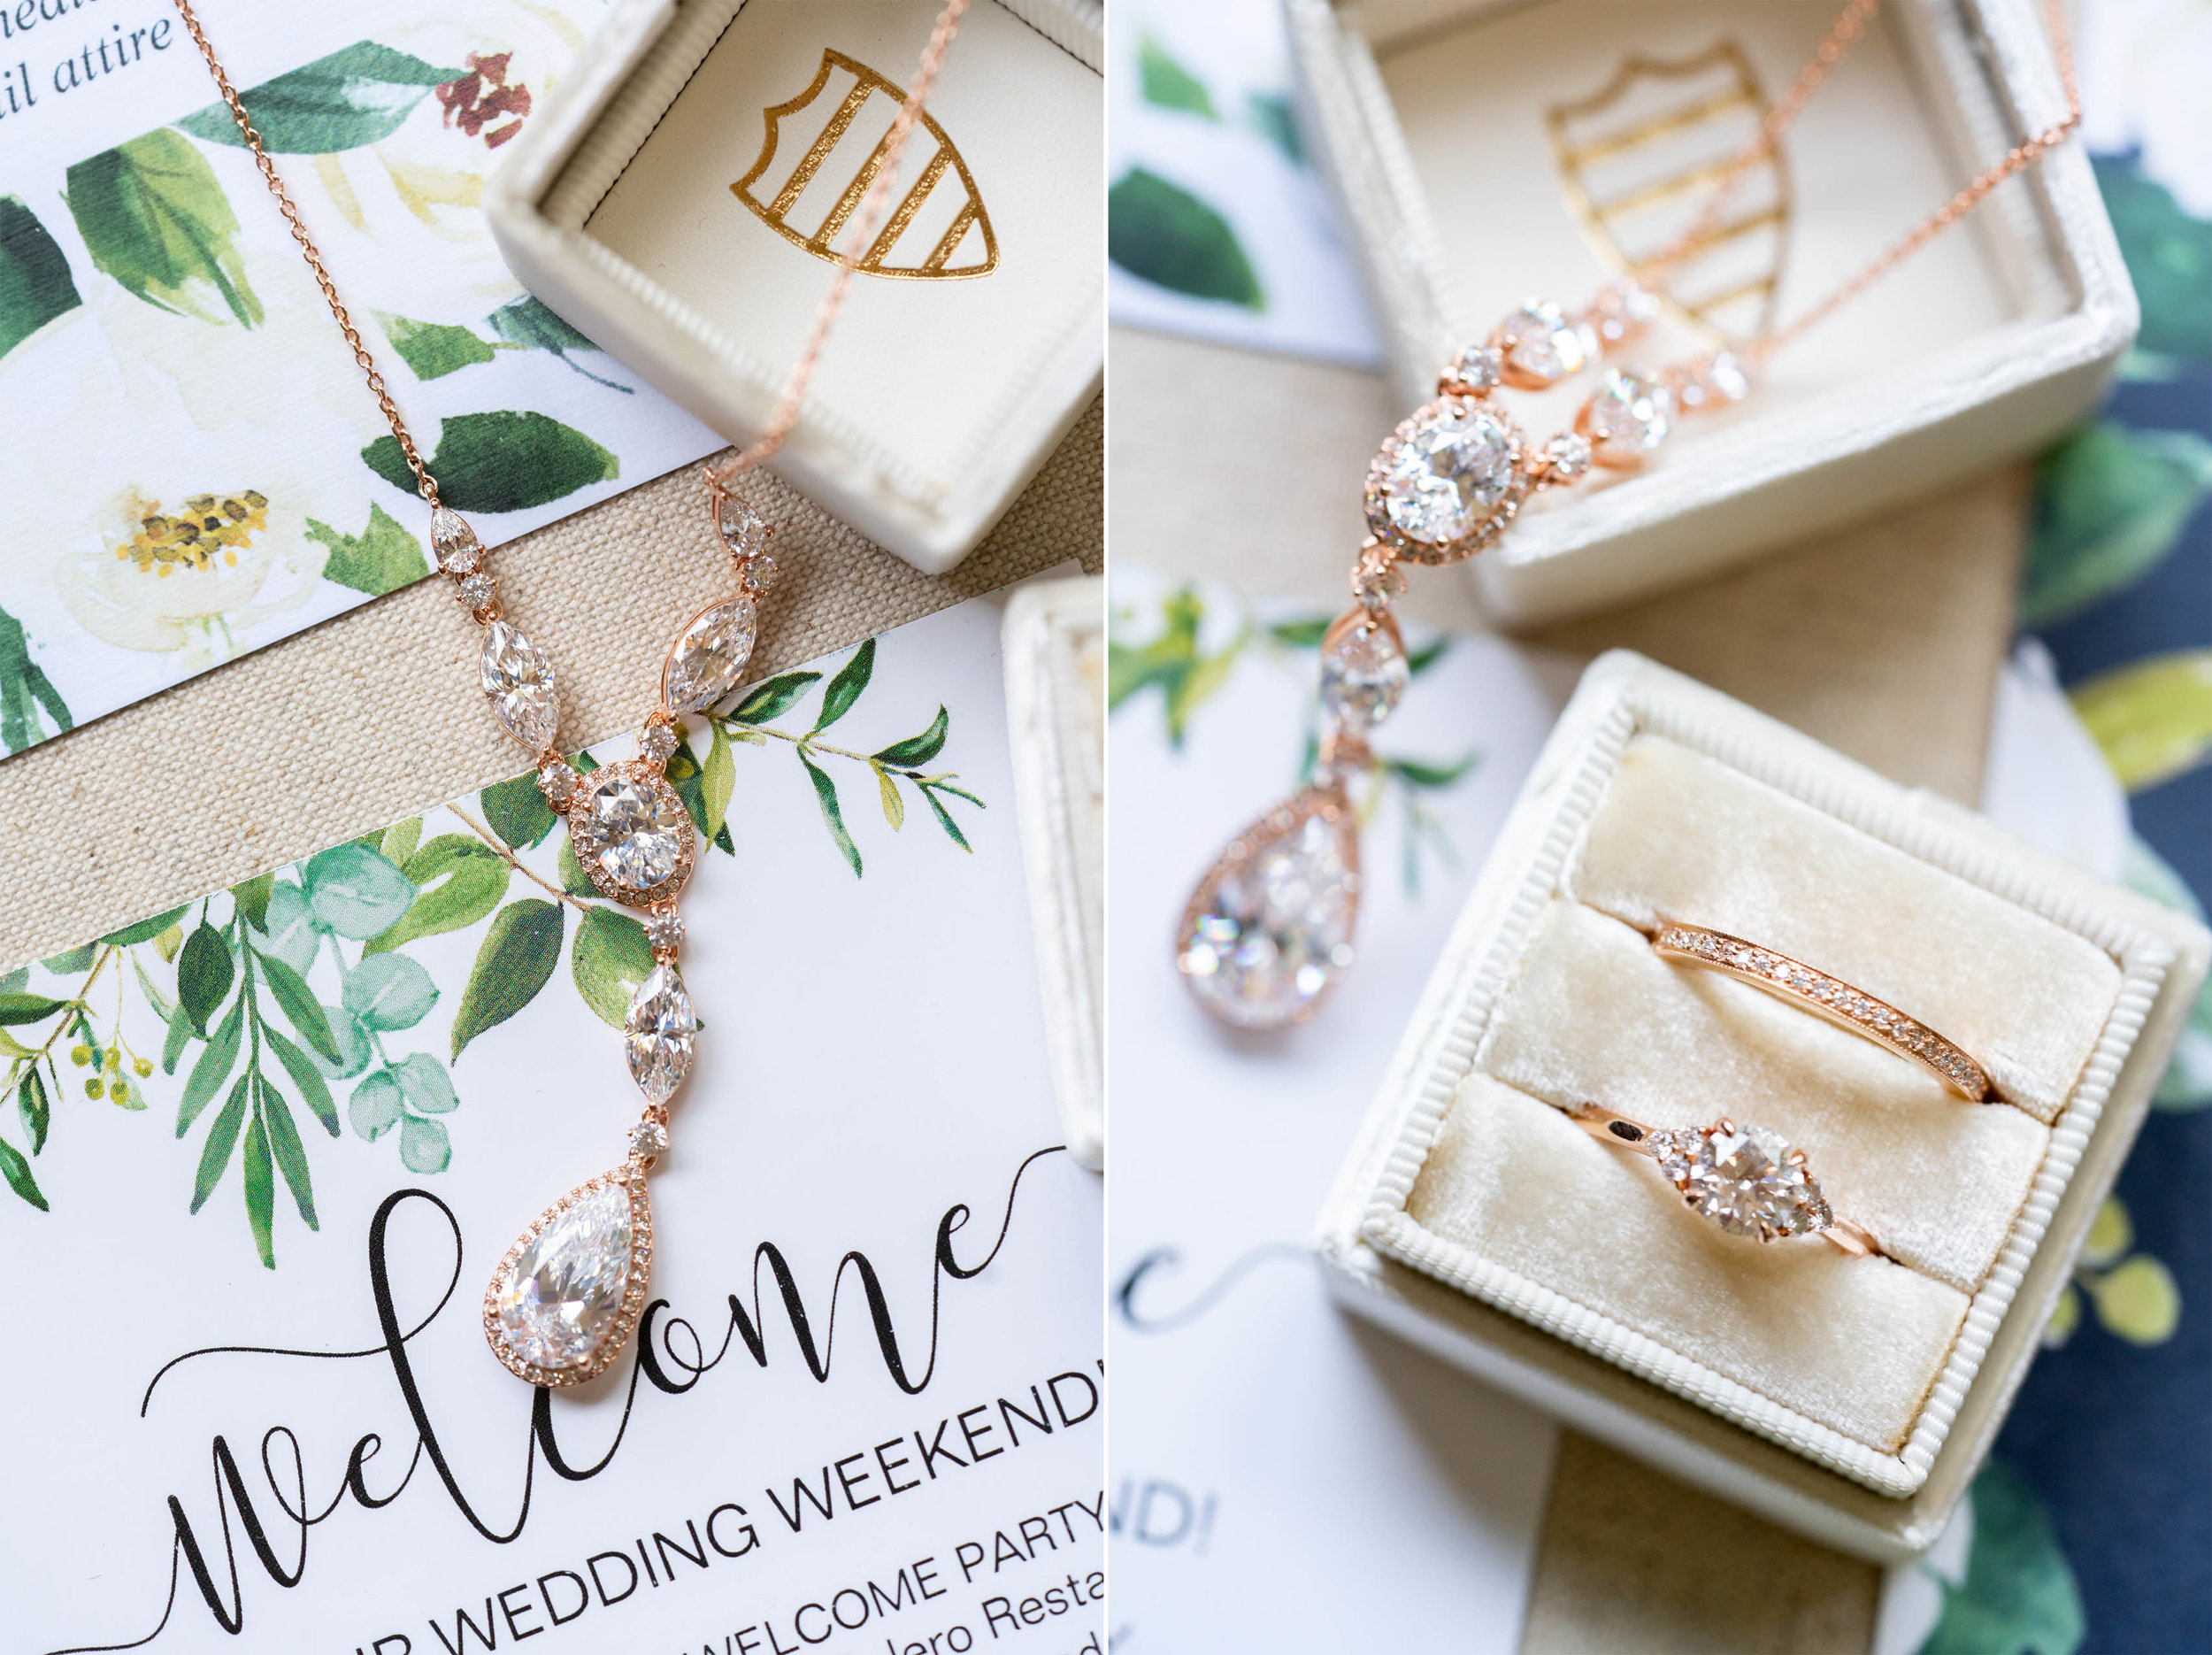  Mrs Box and double in margaery with rose gold and invitation set